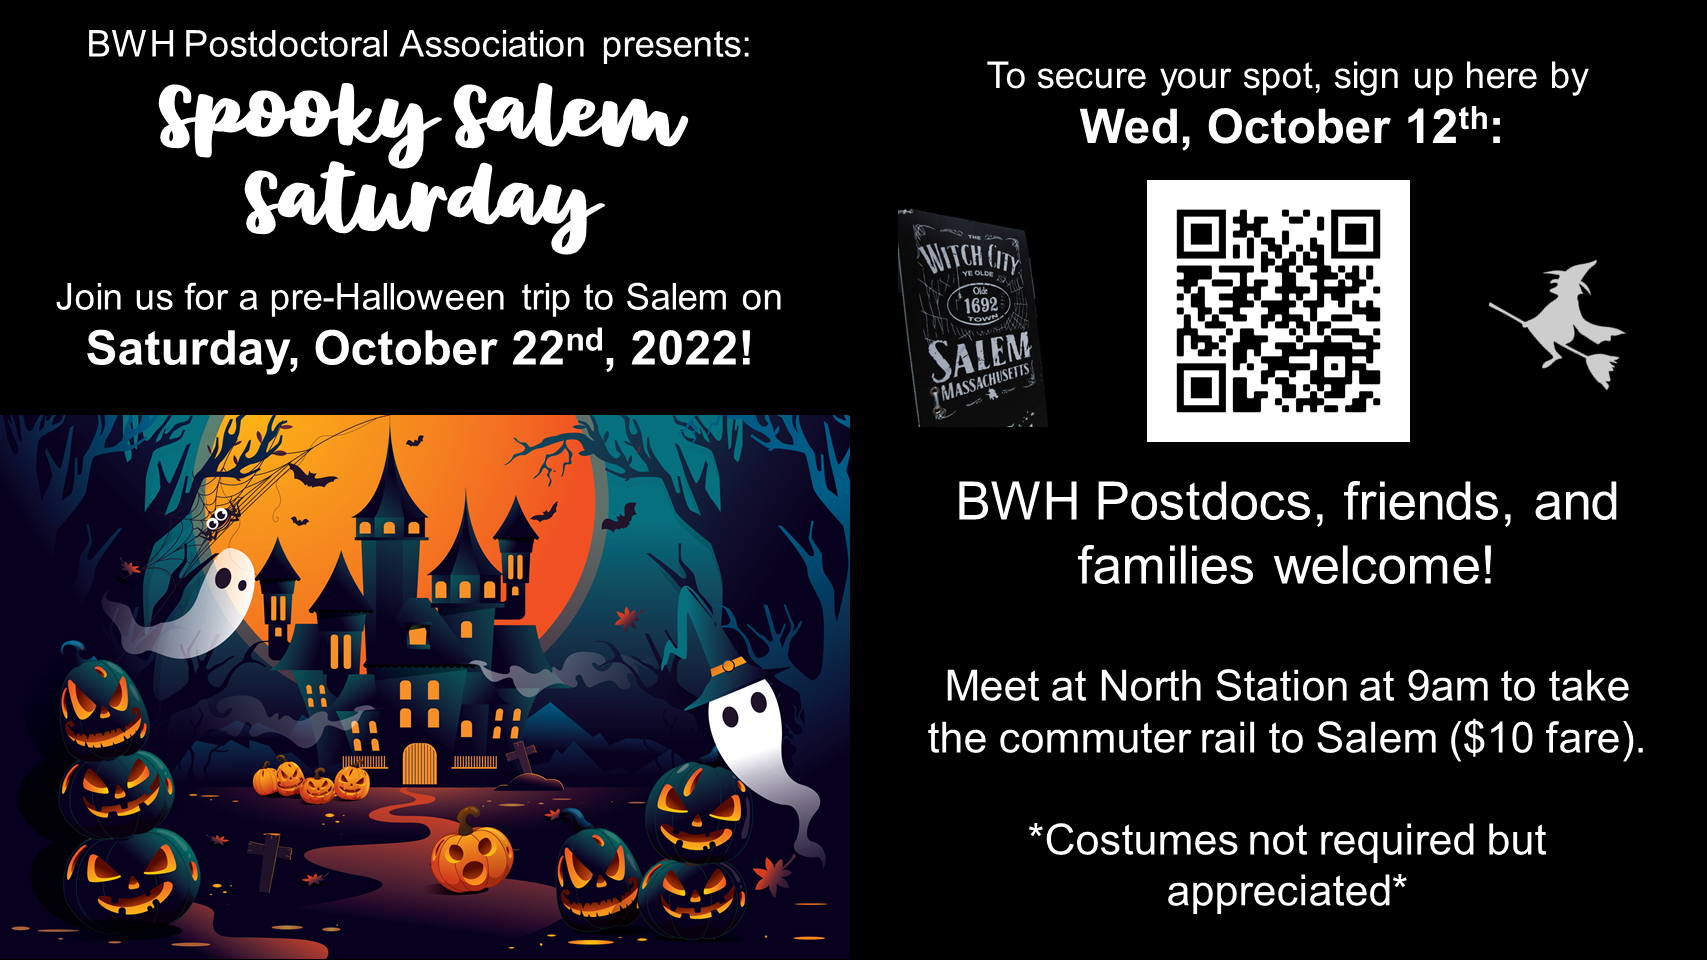 Flyer for the BWH PDA Spooky Salem Saturday event on October 22, 2022. Registration closes Oct 12, 2022.